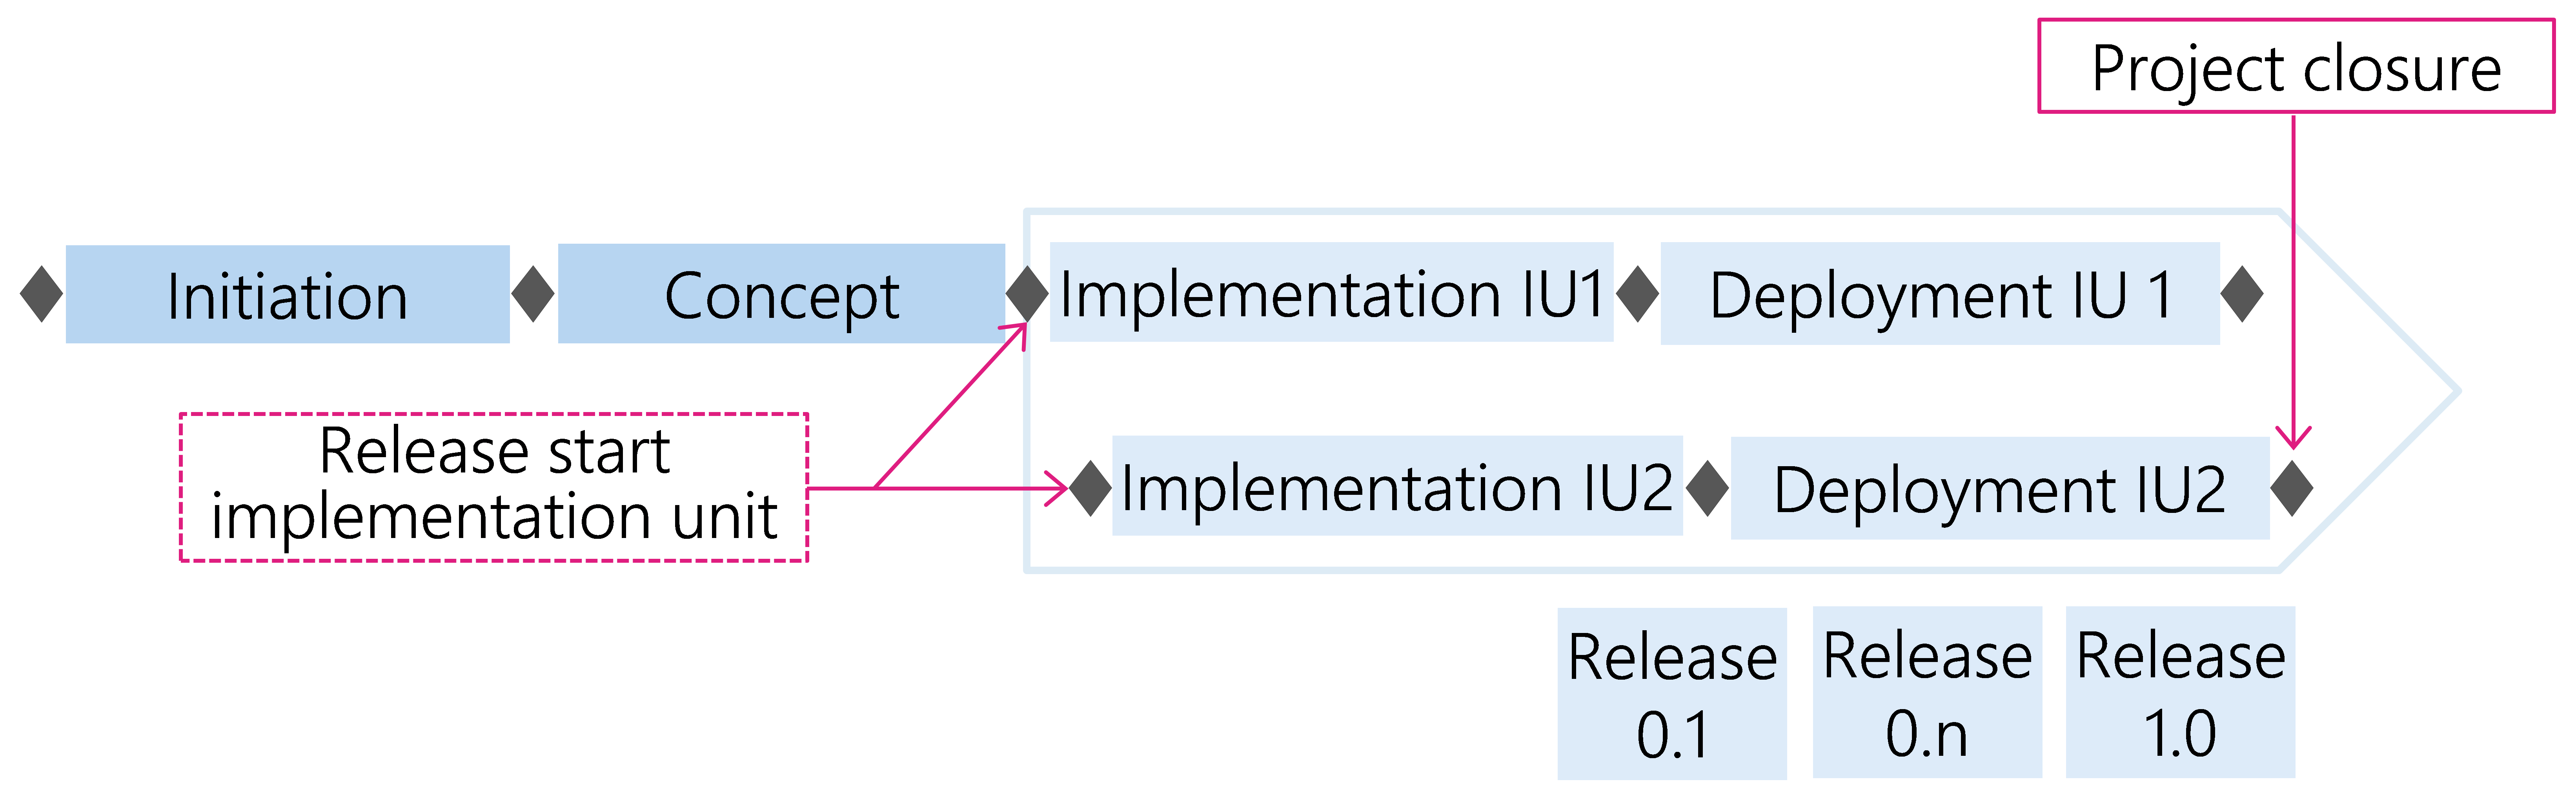 Figure 30: Time lag for implementation units (IU) with several releases